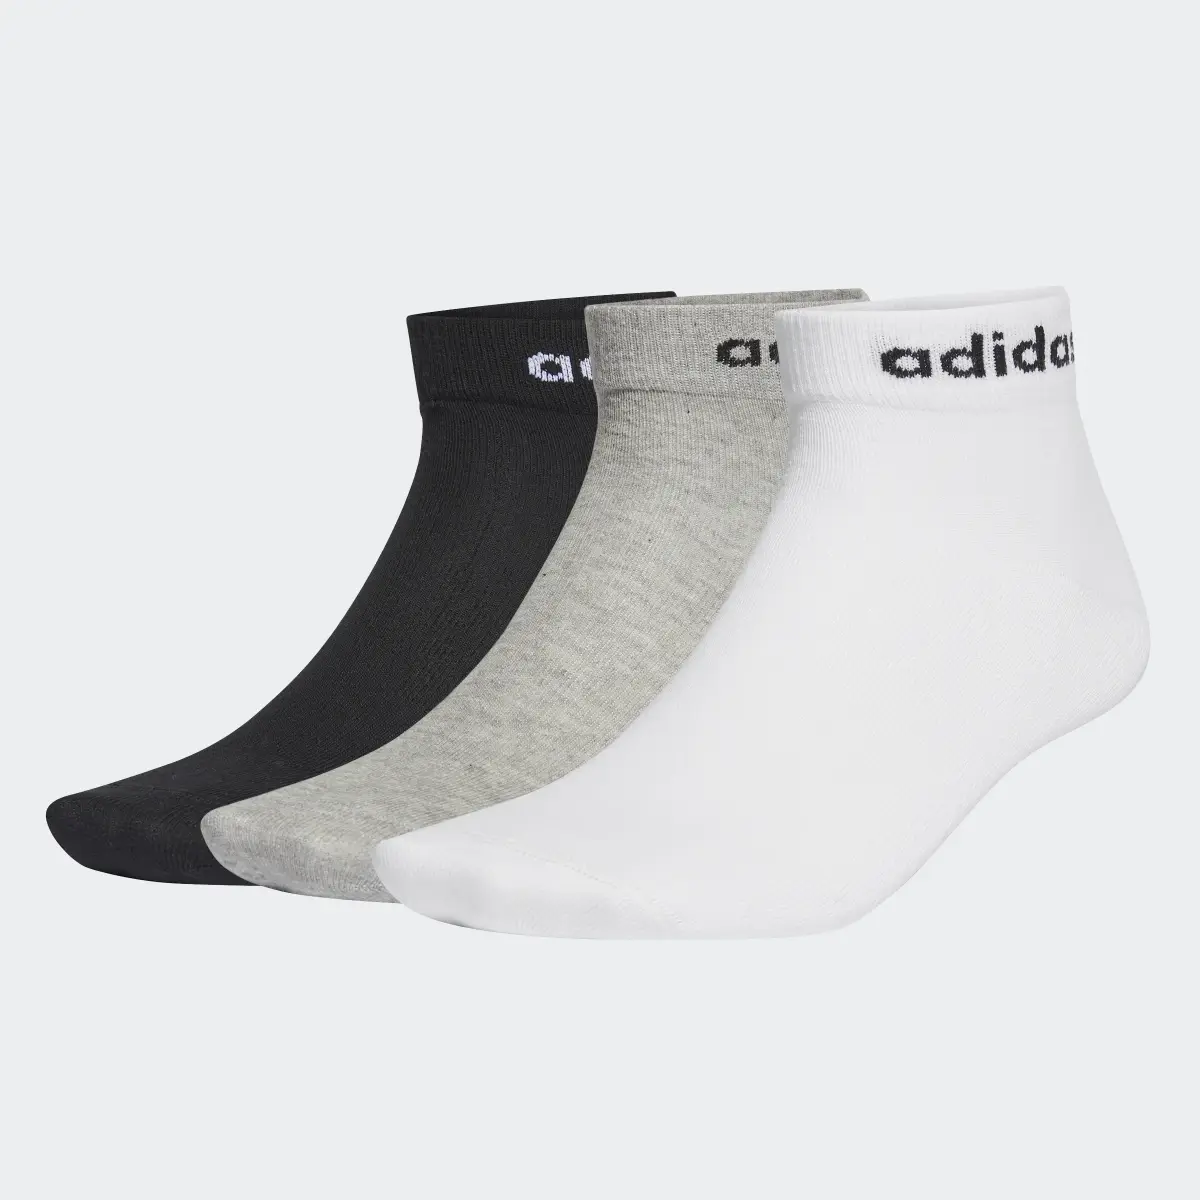 Adidas Non-Cushioned Ankle Socks 3 Pairs. 2